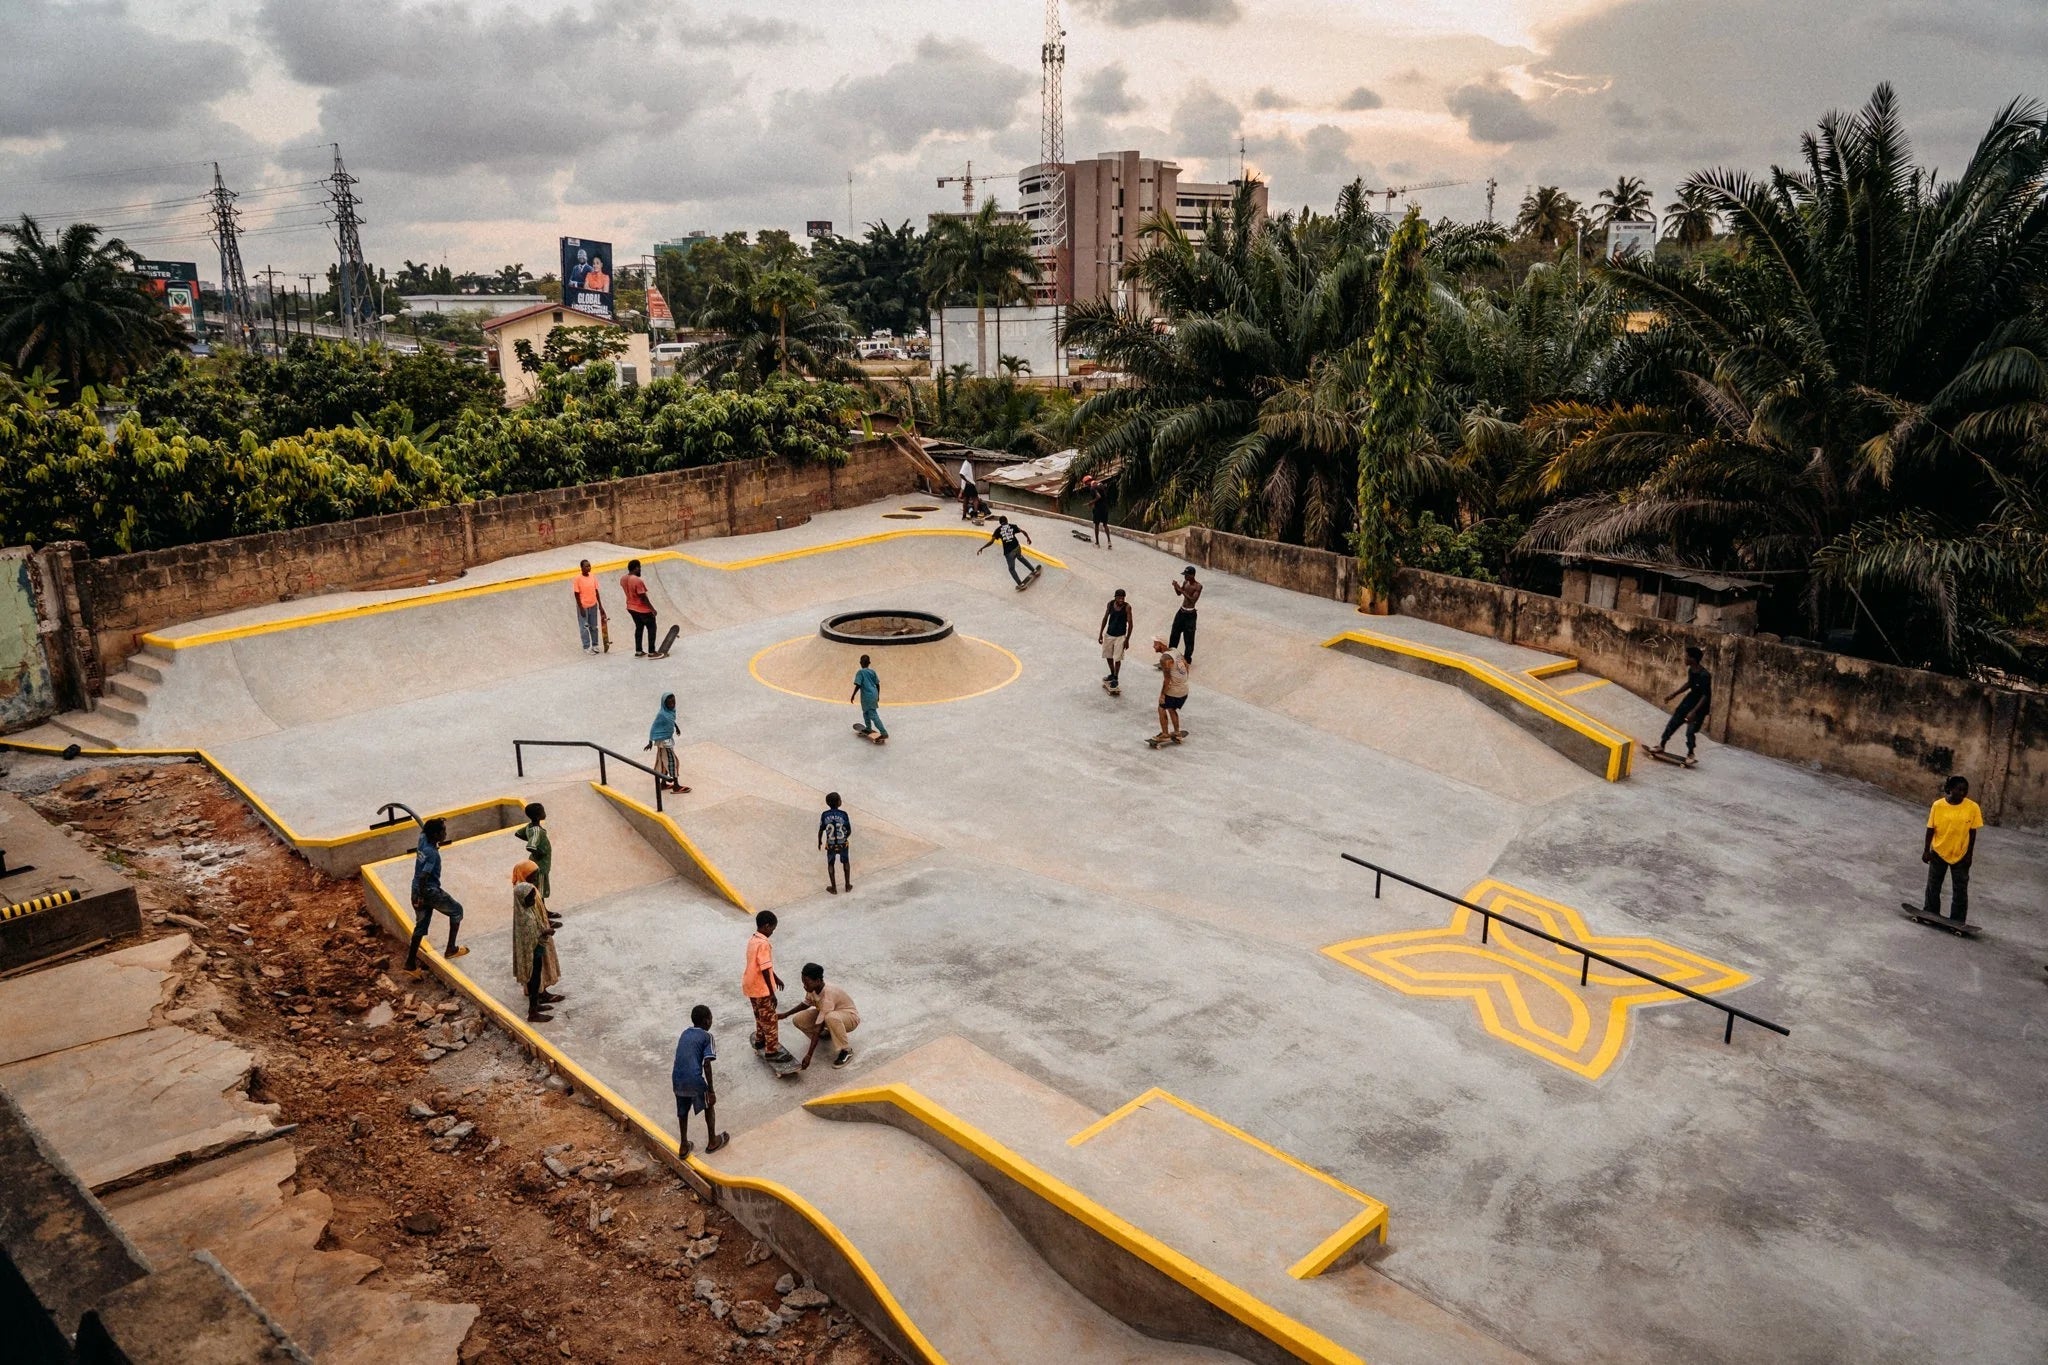 Daily Paper, Off-WhiteTM and Surf Ghana’s Vision of Building Ghana’s First Skatepark Has Come To Life